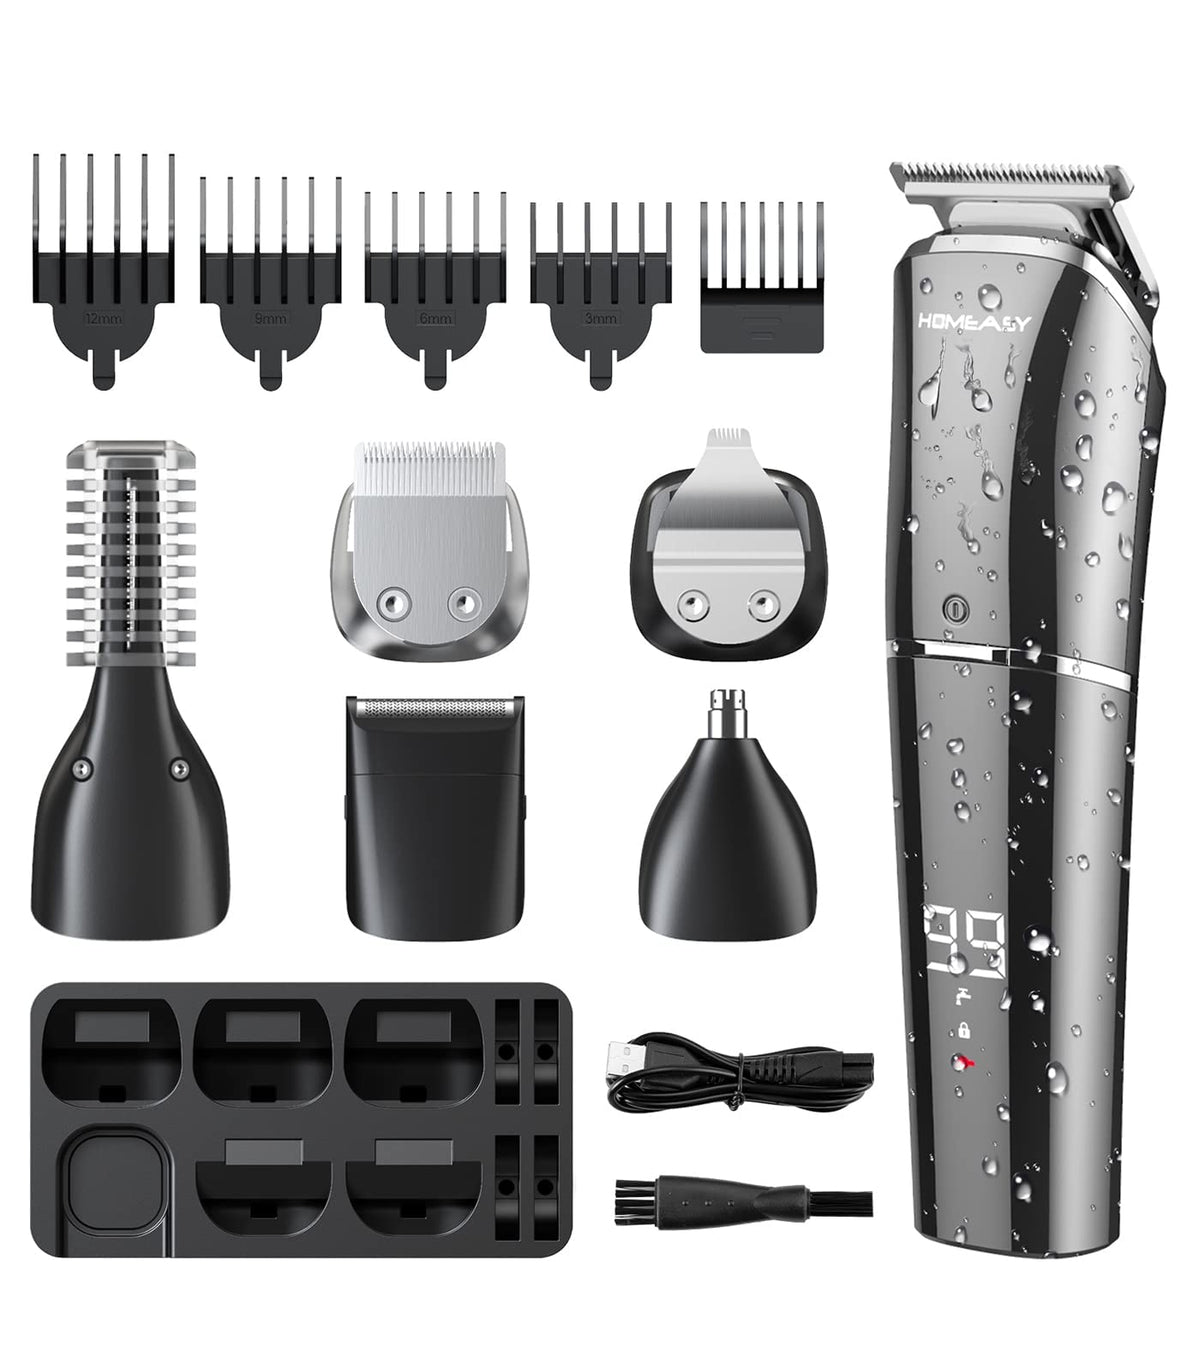 Beard Trimmer, 6 in 1 Men Hair Clipper homeasy Electric Hair Trimmer Razor Rechargeable Professional Mens Grooming Kit Hair Cutting Machine with LED Display Hair Shaver for Men Kids Barbers